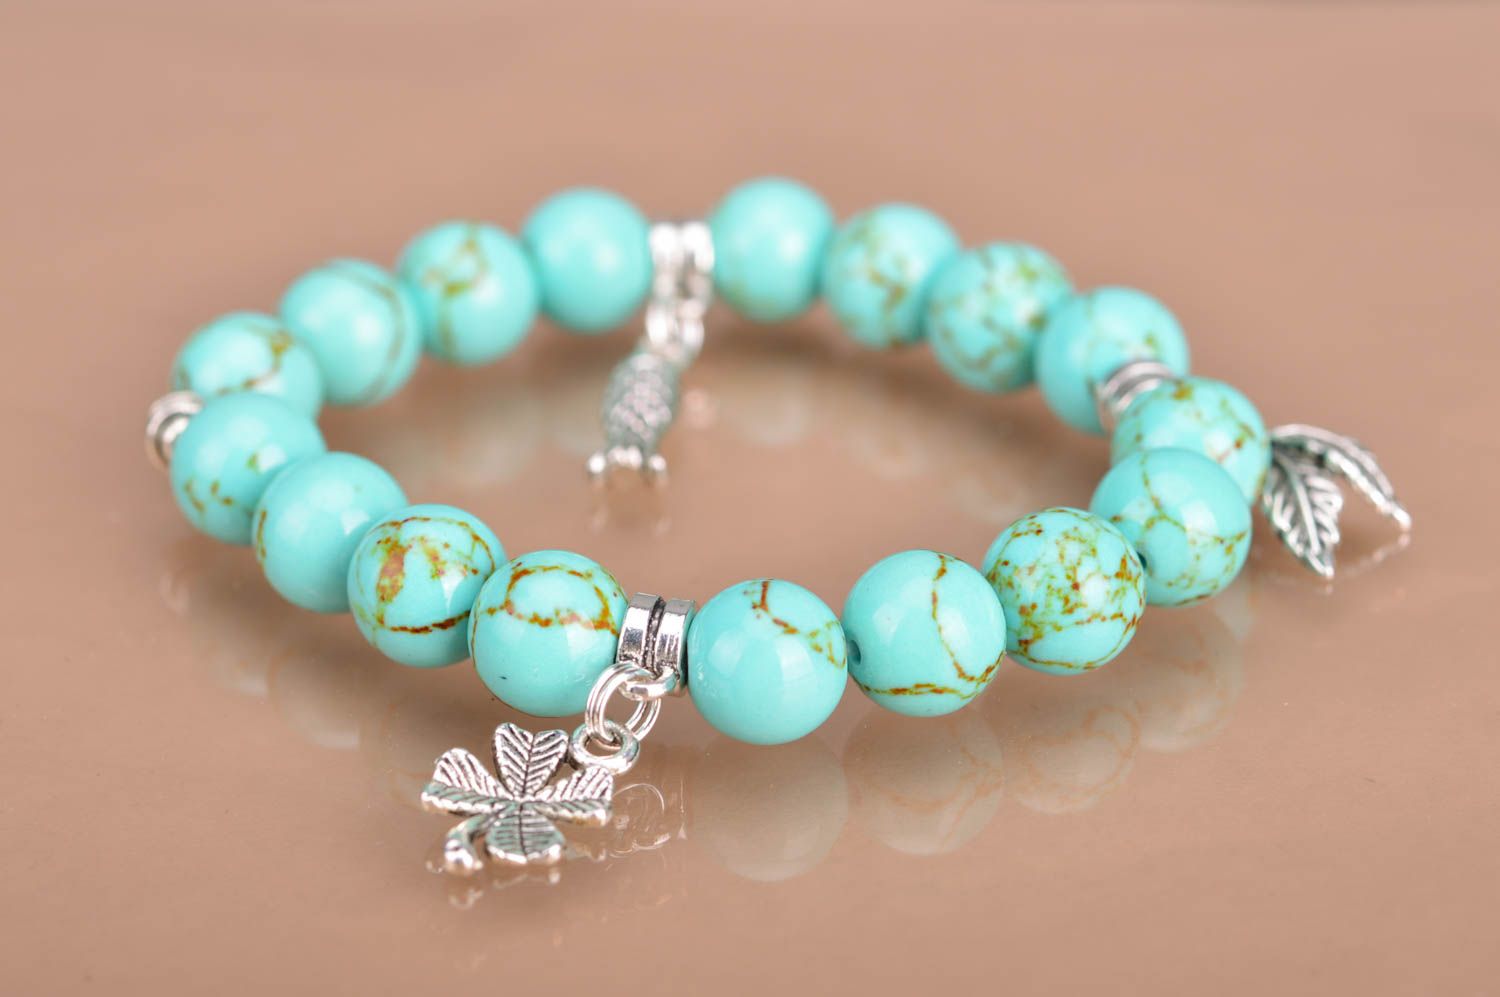 Handmade beaded wrist bracelet styled on turquoise with metal charms fish leaves photo 2